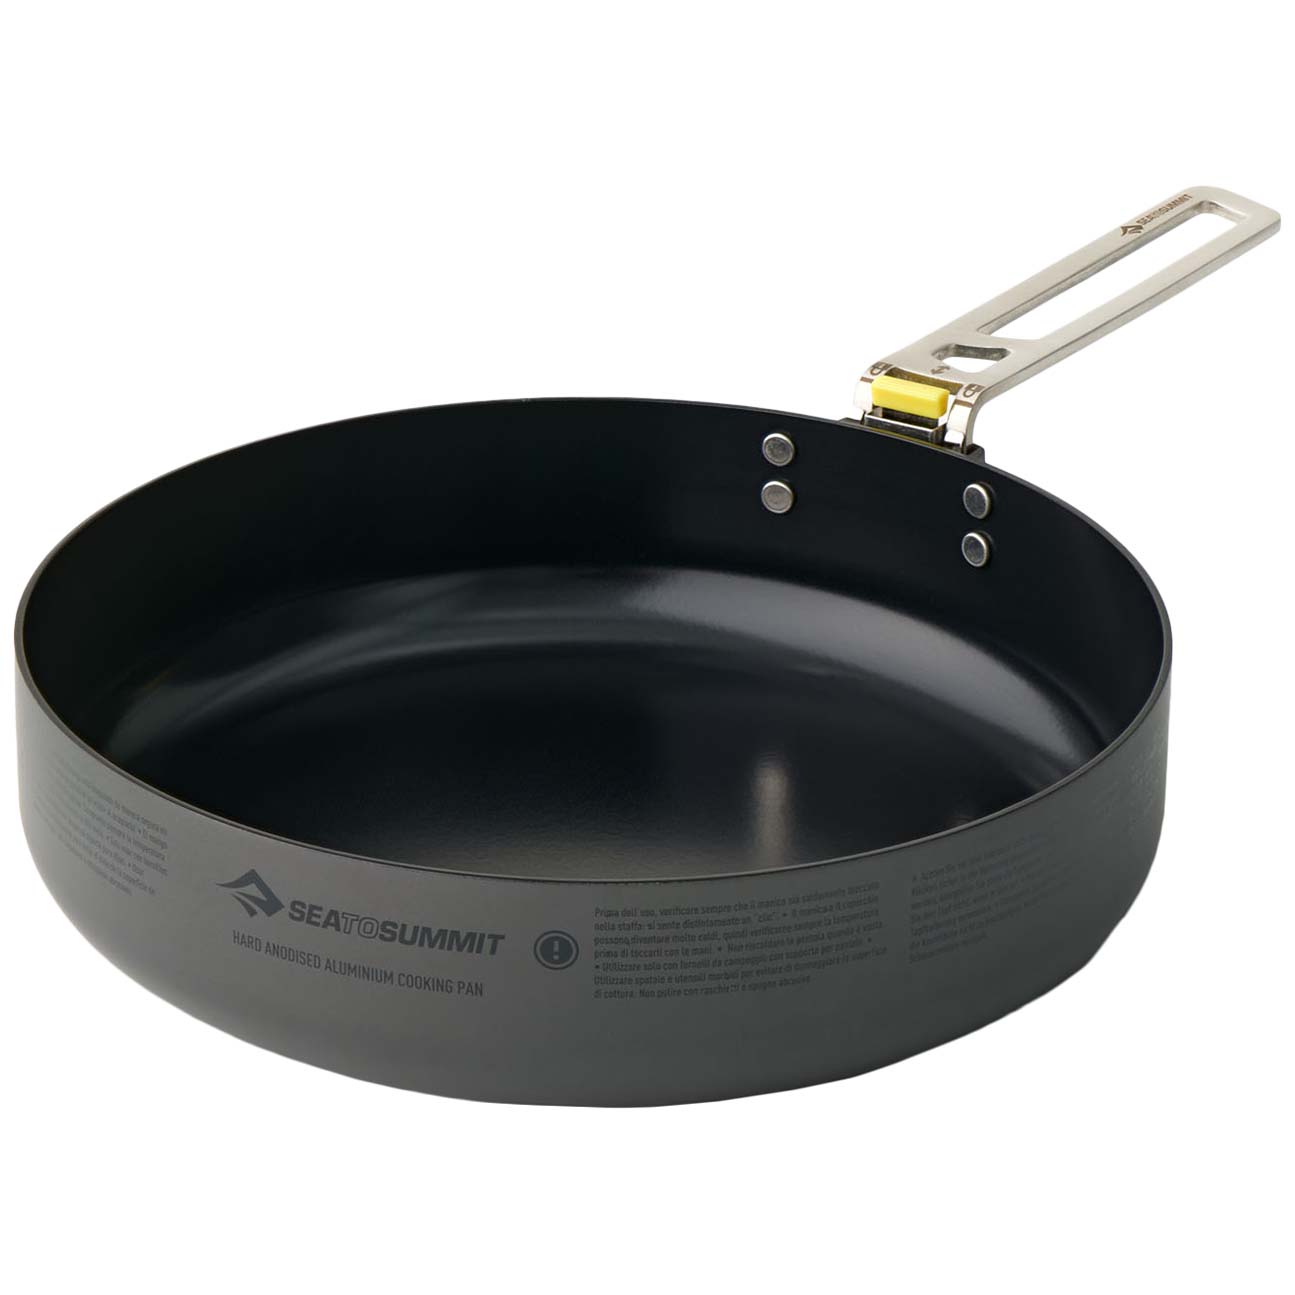 Sea to Summit Frontier 8" Ultralight Camping Frying Pan